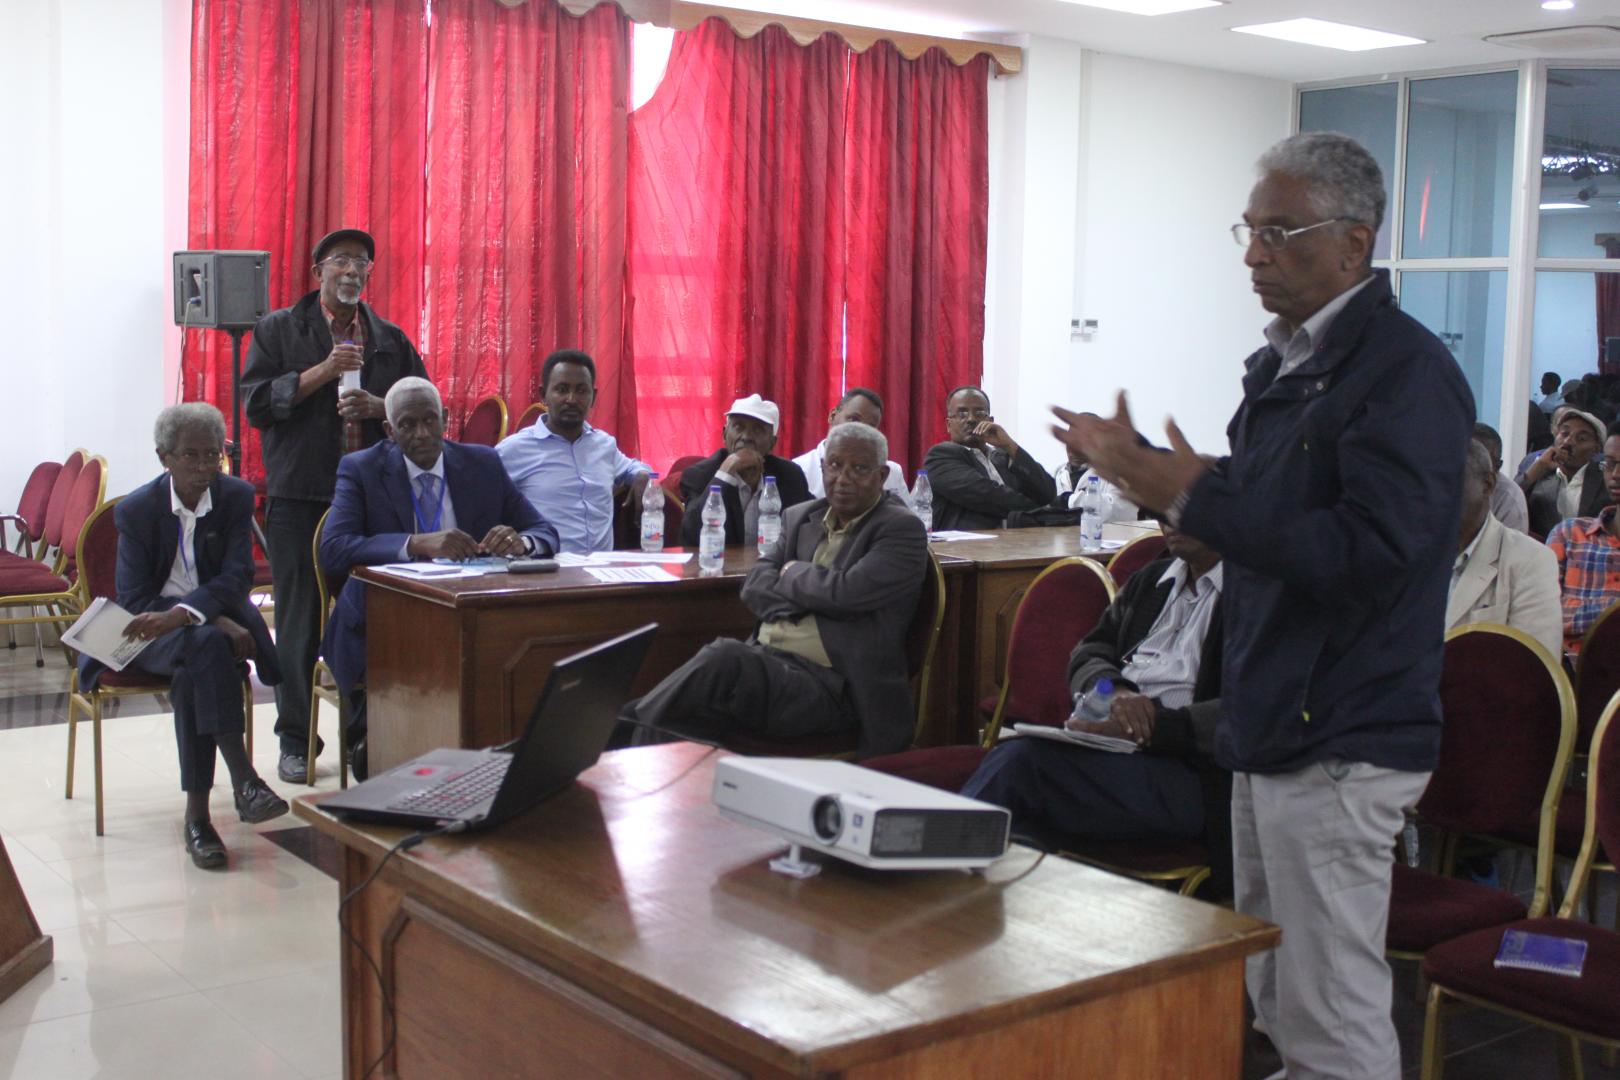 Mr Berhane Gebretnsae, Director General of Medical Services expressing his comments to the researchers